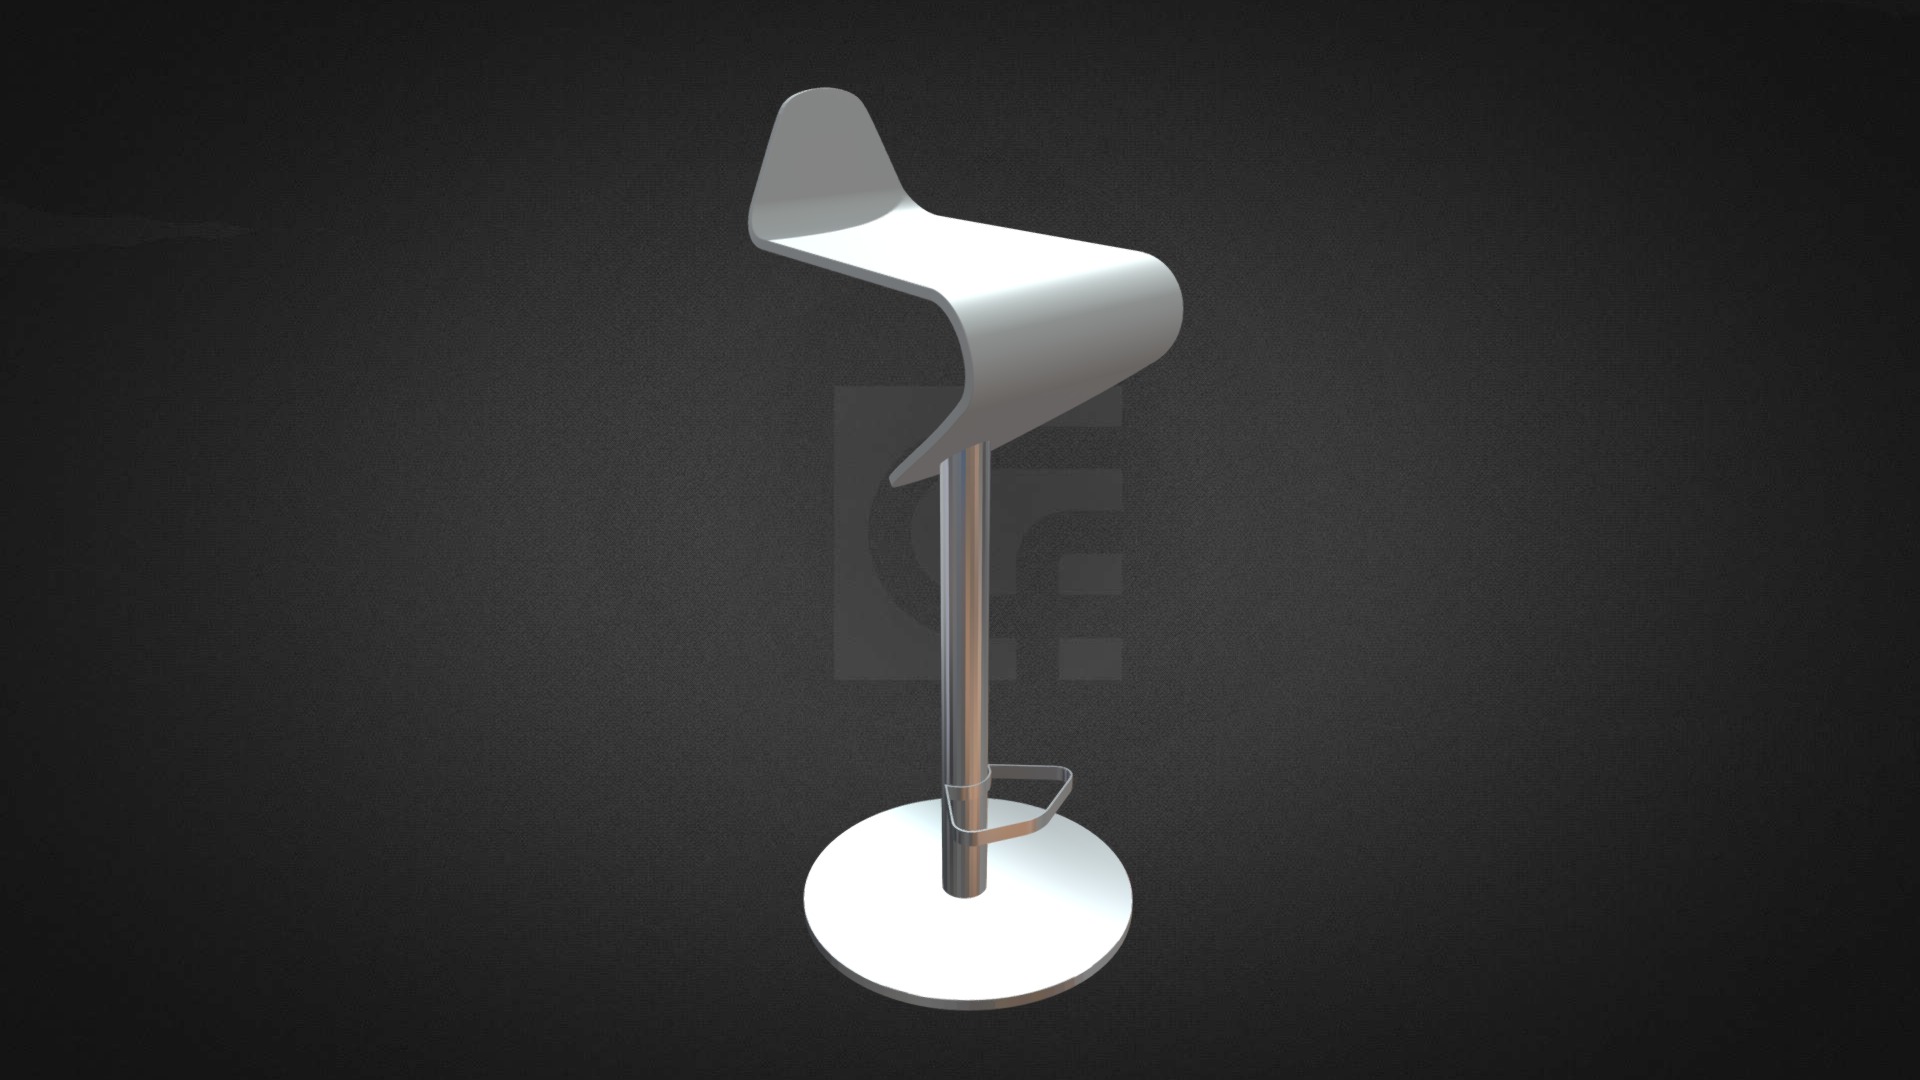 3D model Surf Stool Hire - This is a 3D model of the Surf Stool Hire. The 3D model is about a light bulb on a stand.